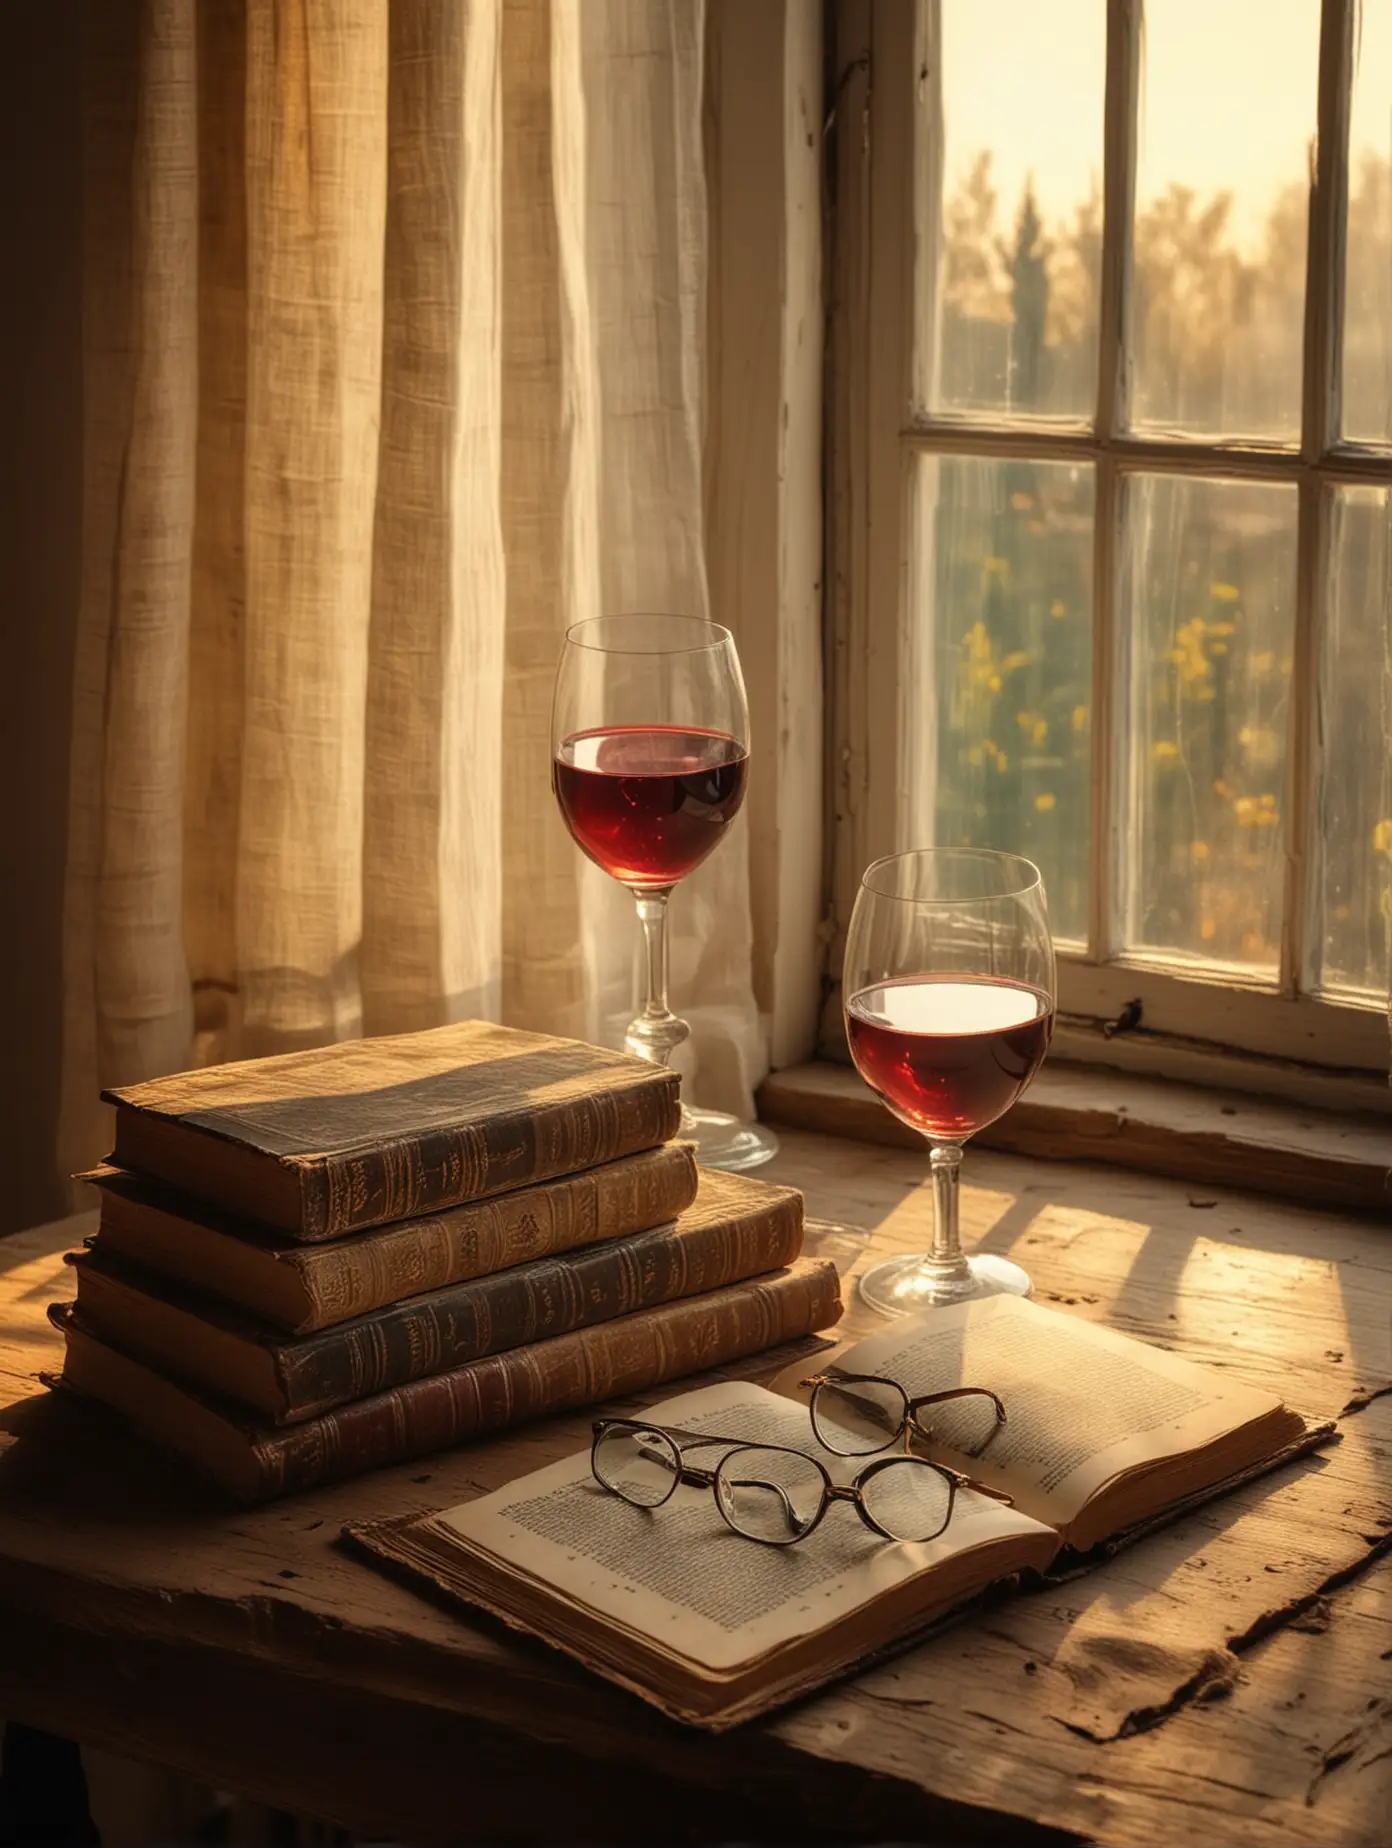 in style of van gogh make an image of antique books on old wooden table with 1pair small antique pair glasses nearby and one glass of wine near a large window with early morning sunlight